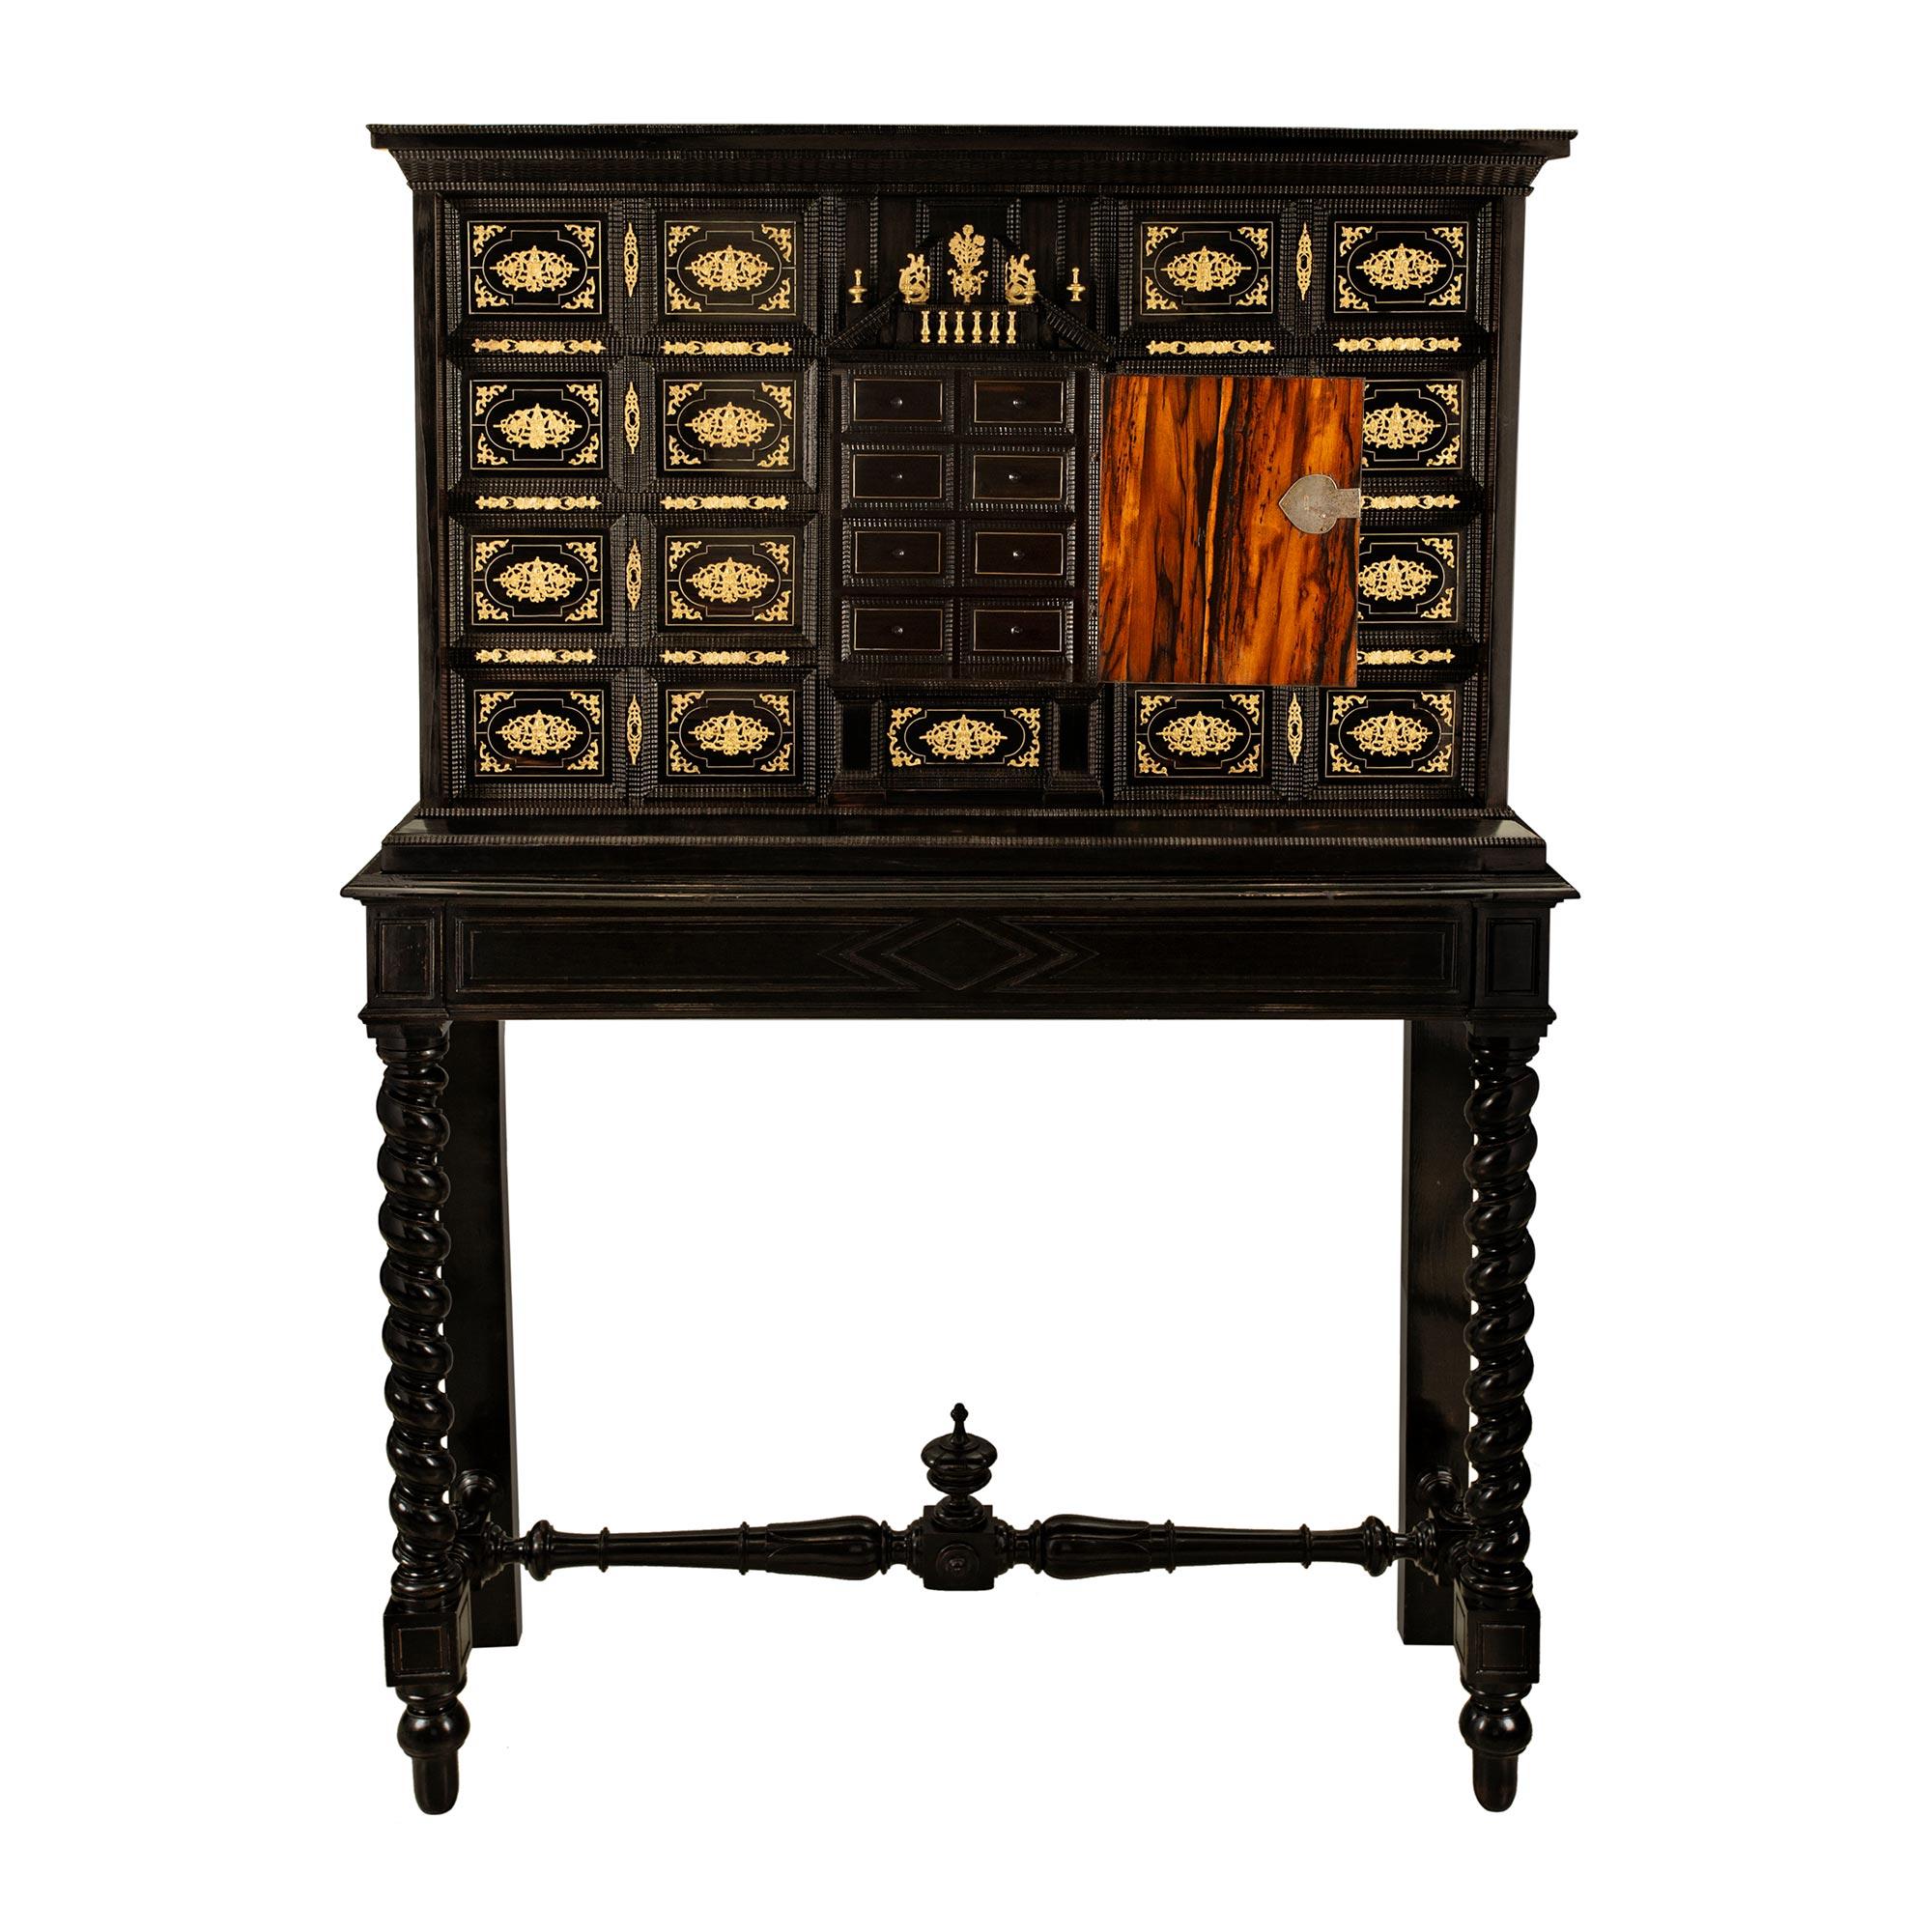 A stunning early 18th century Spanish ebonized fruitwood, rosewood, bone and ormolu specimen cabinet. The cabinet is raised on its original base with beautiful spiral legs and block reserves with topie shaped feet. Each leg is connected by a most